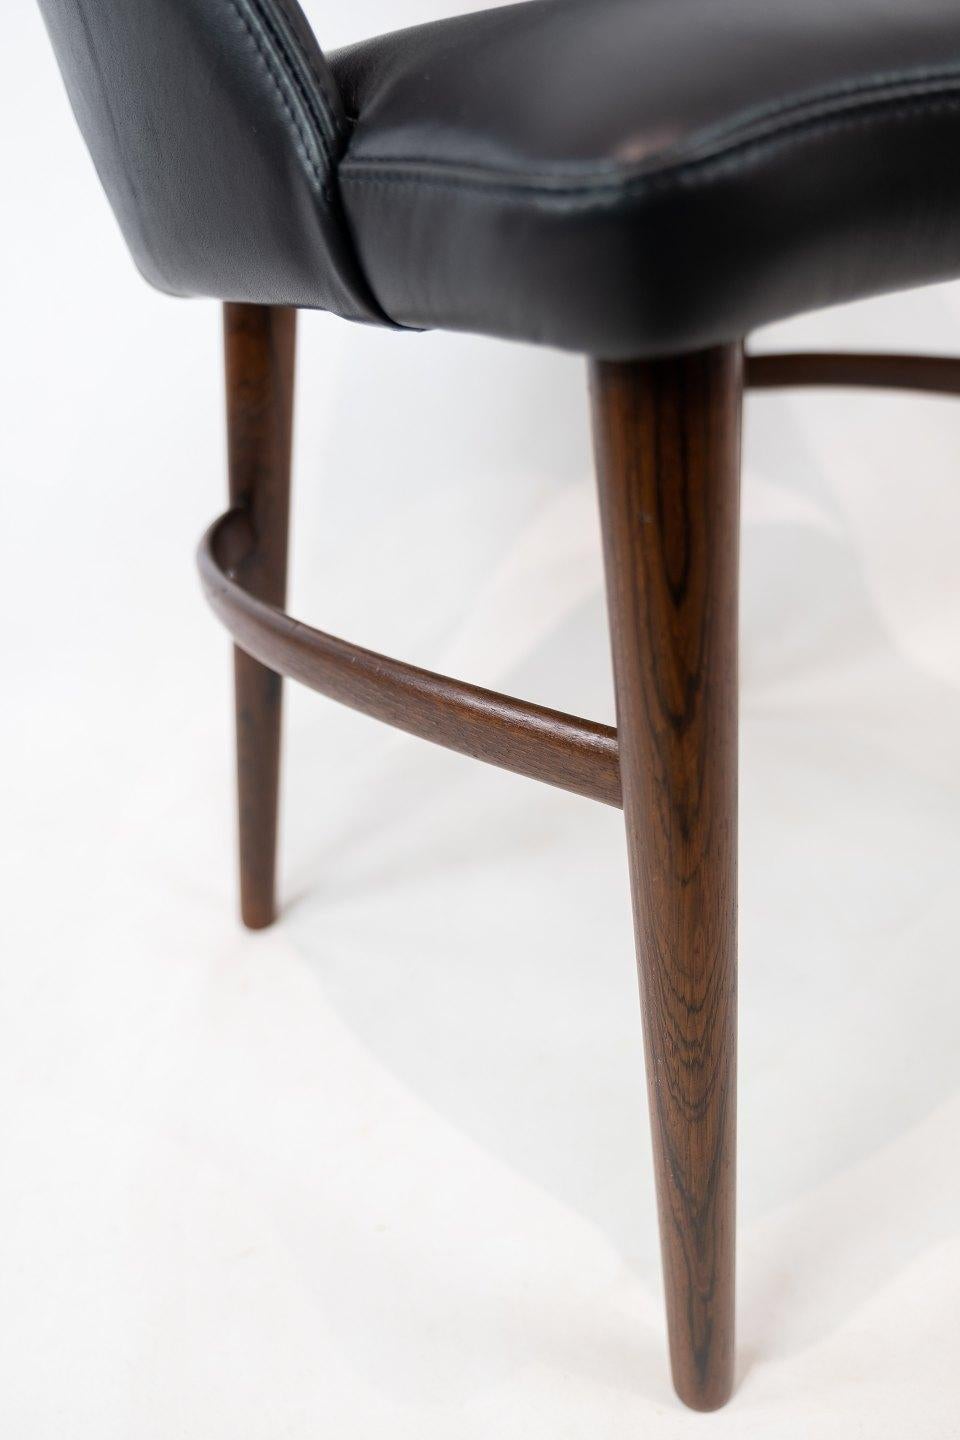 Easy chair upholstered with black leather and legs of rosewood designed by Chr. Linneberg from the 1960s.The chair is in great vintage condition.
  